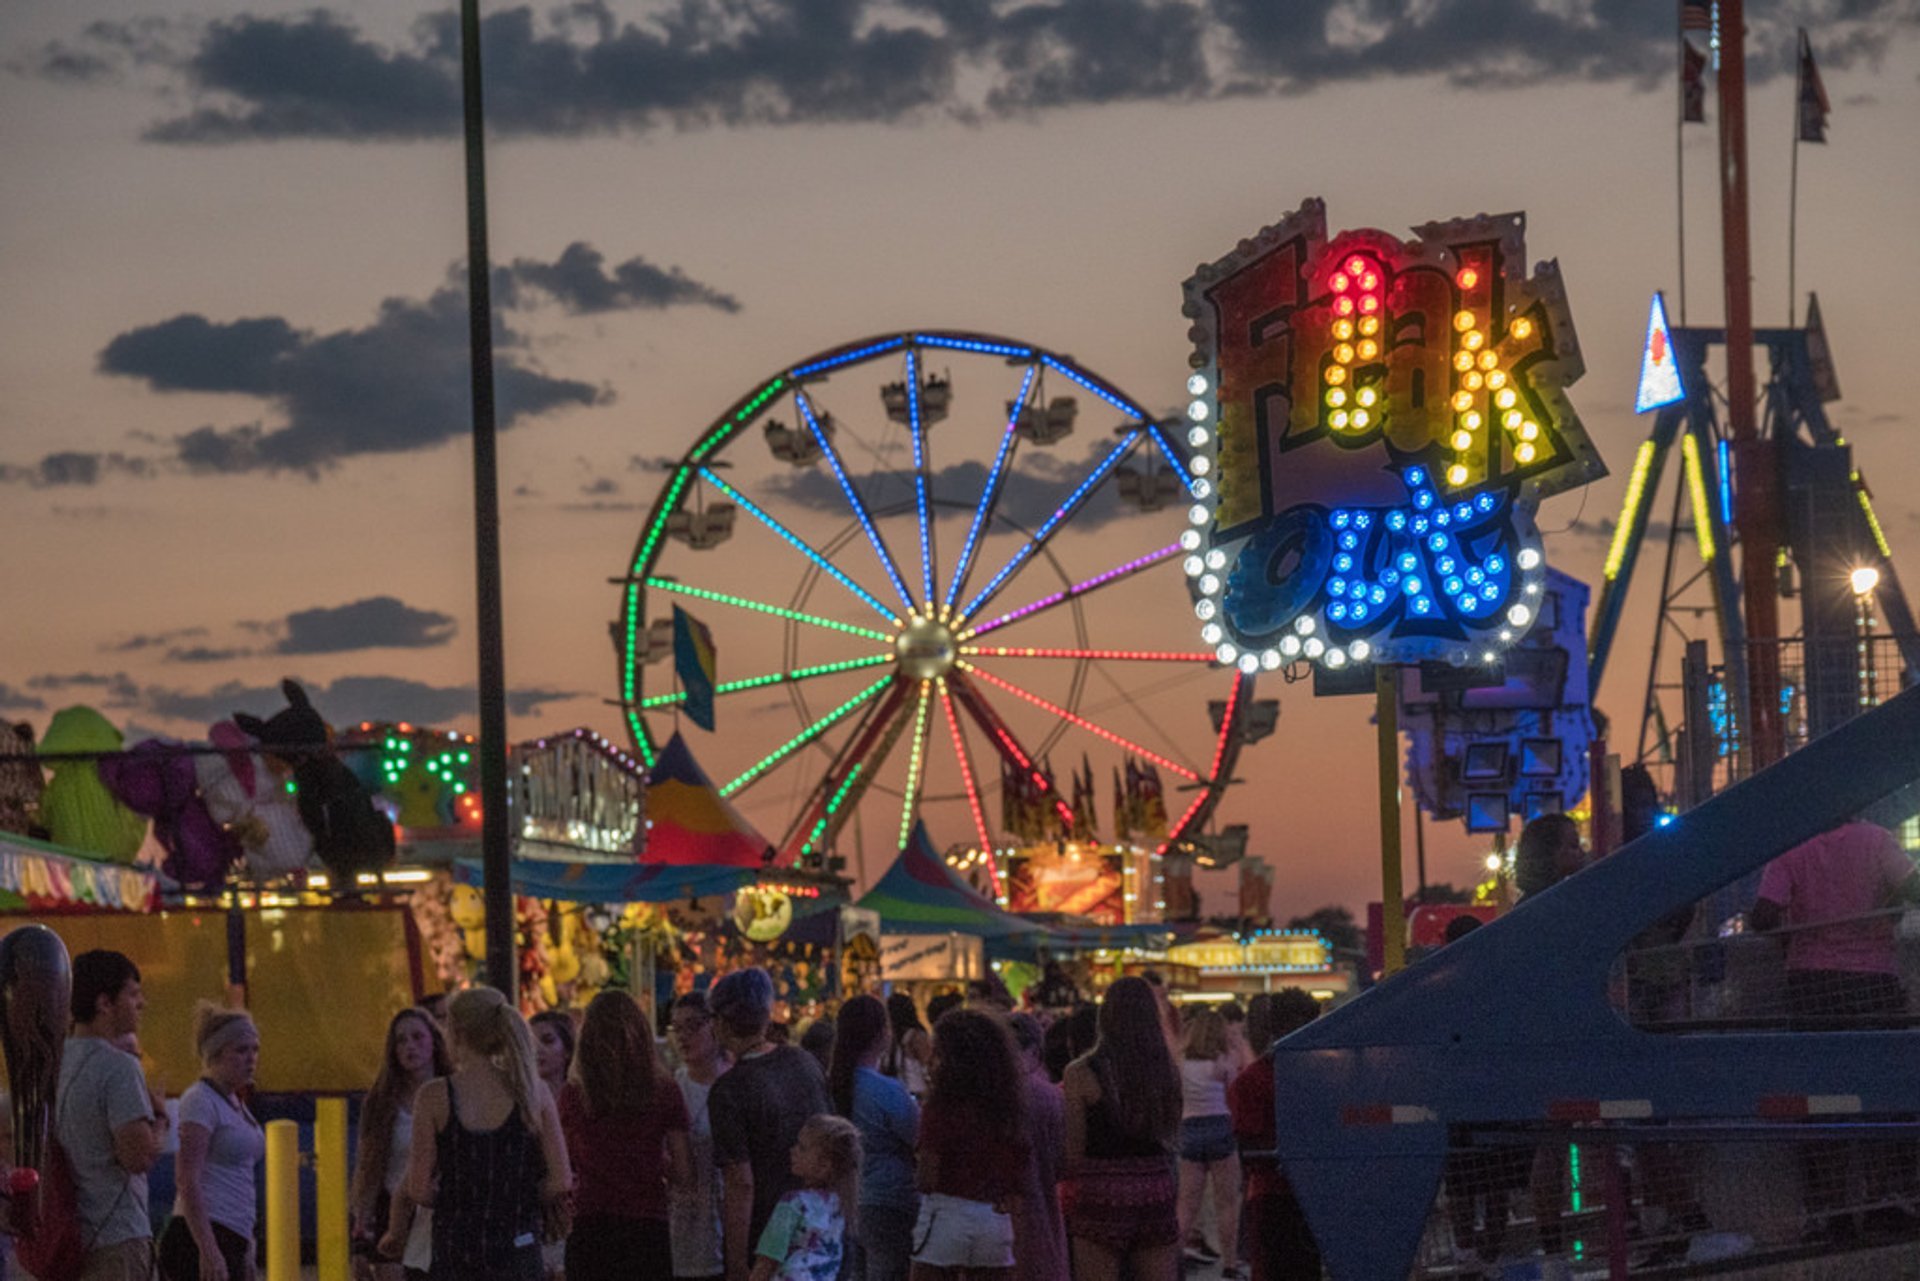 Illinois State Fair 2022 Schedule Illinois State Fair 2022 In Midwest - Dates